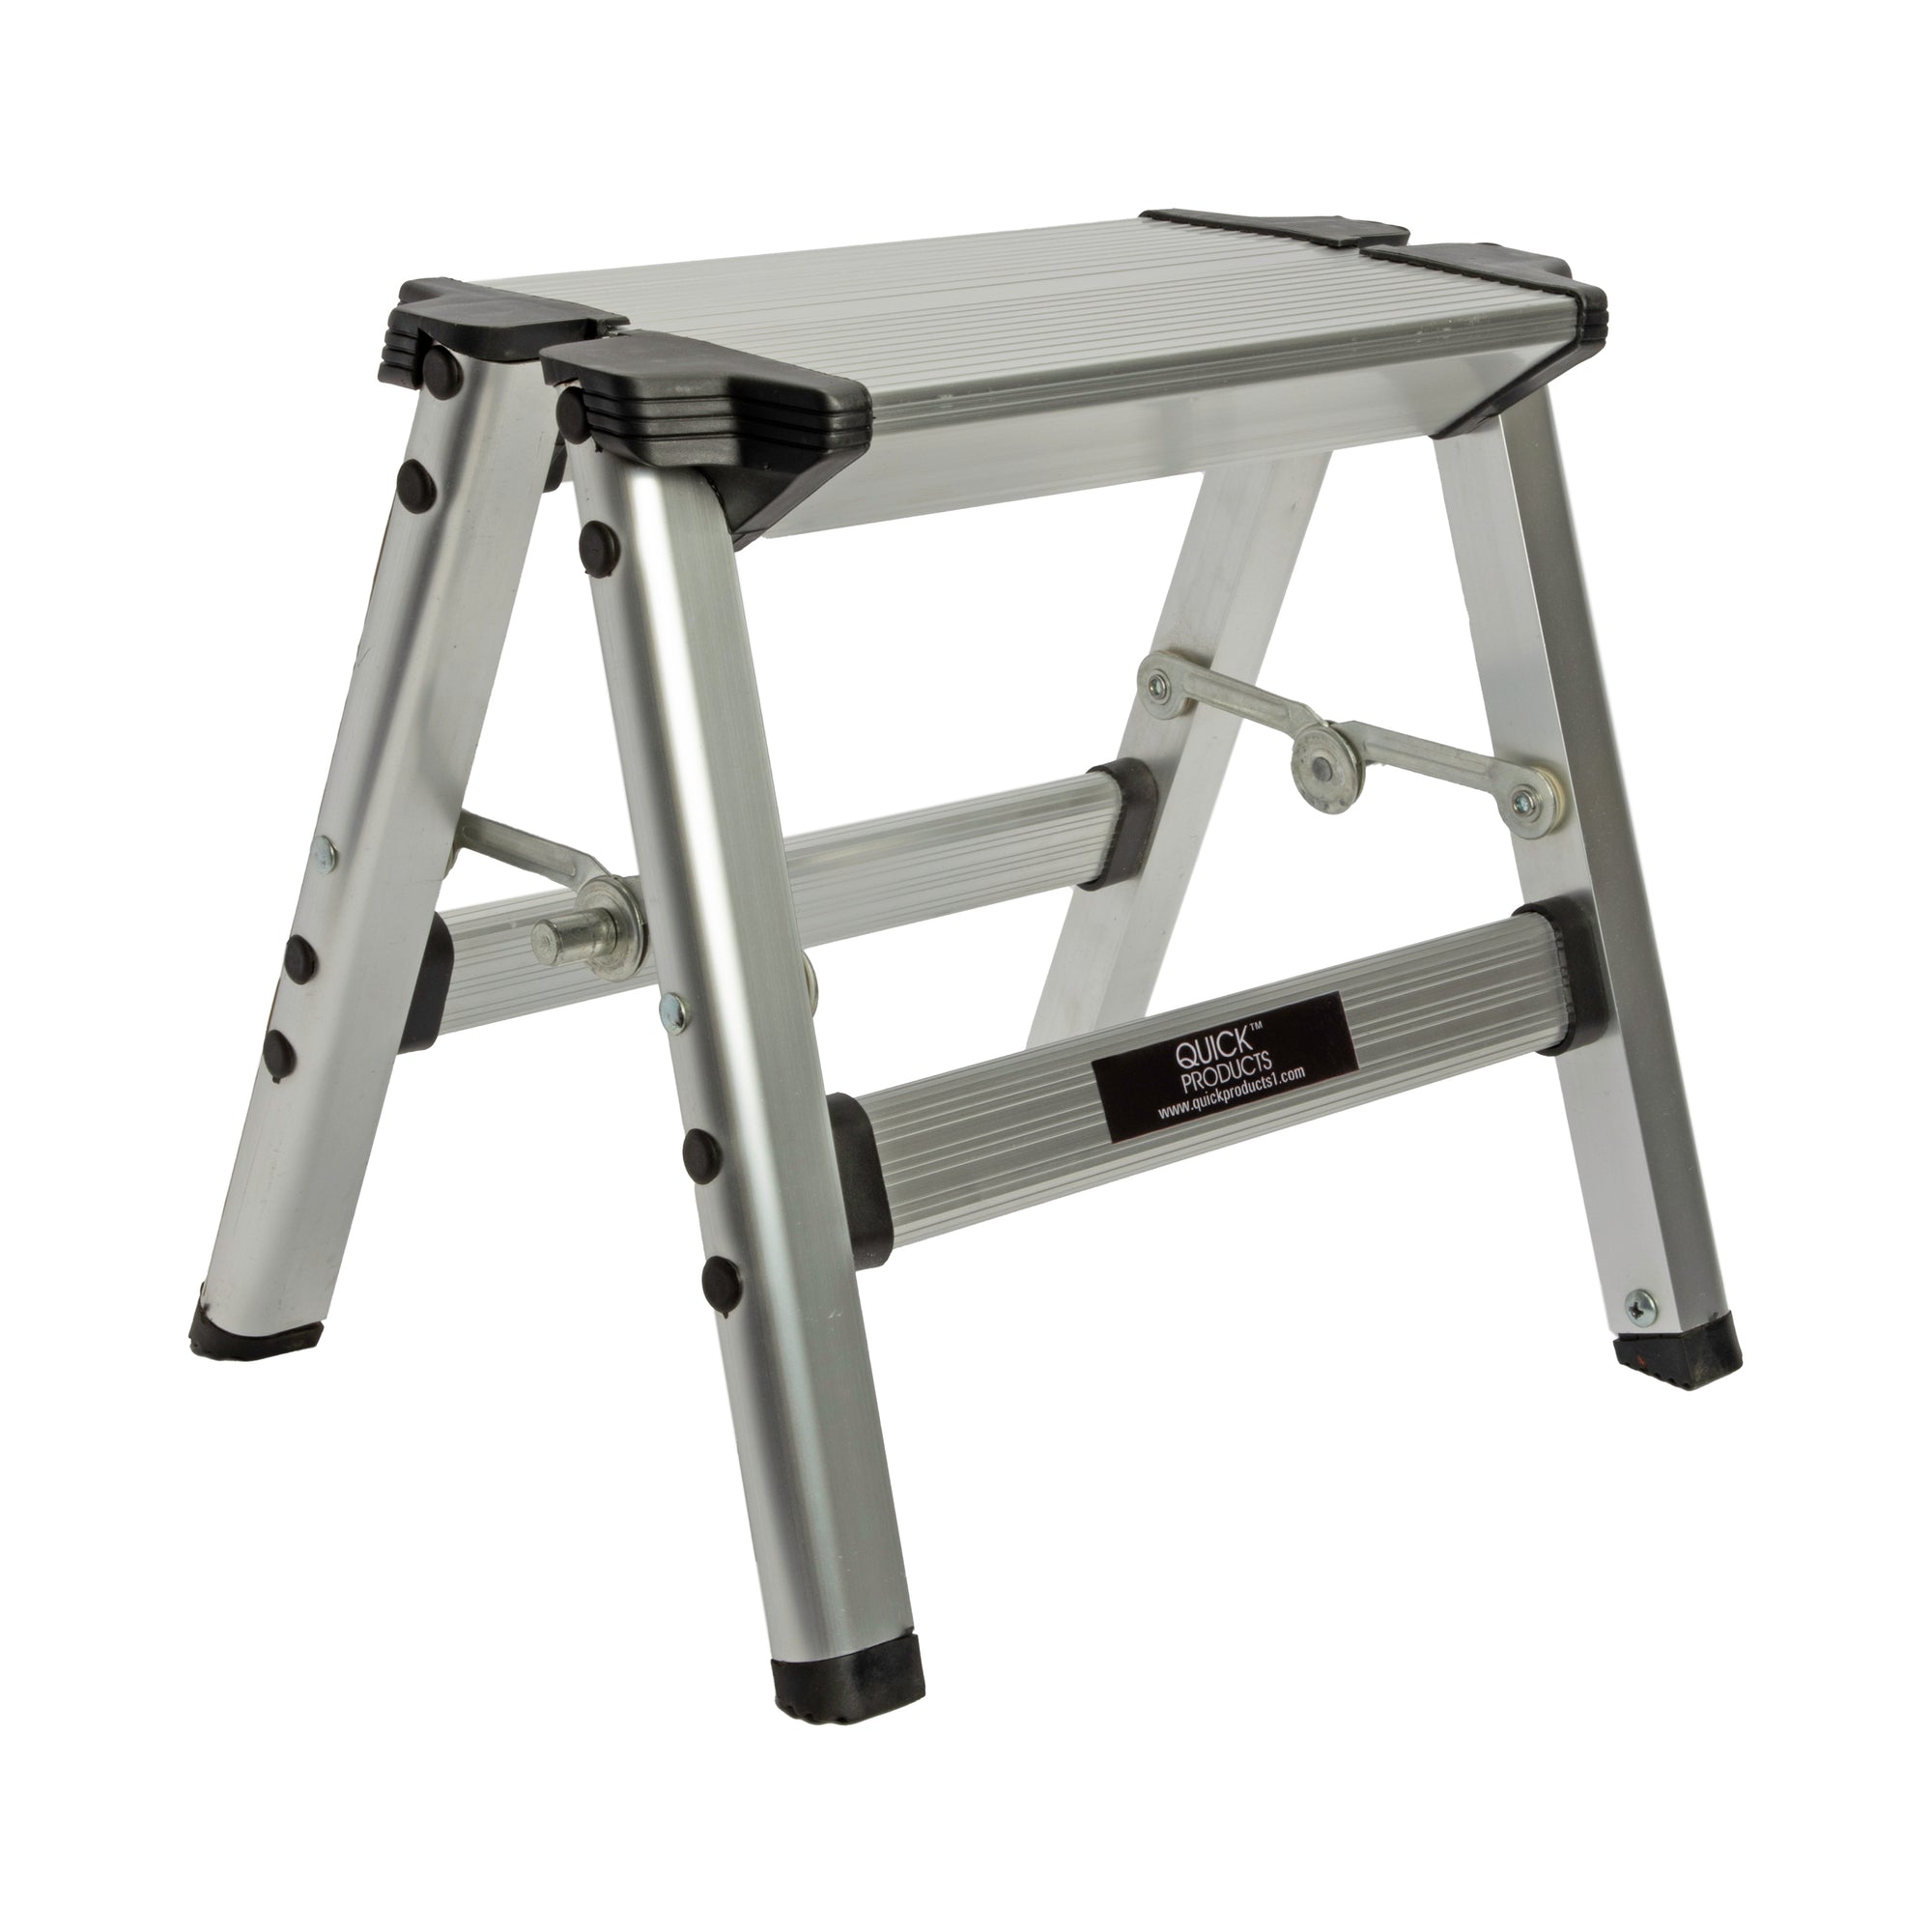 Quick Products QP-FOSS Slim-Profile Easy Folding One-Step Stool - 200 lbs. Capacity